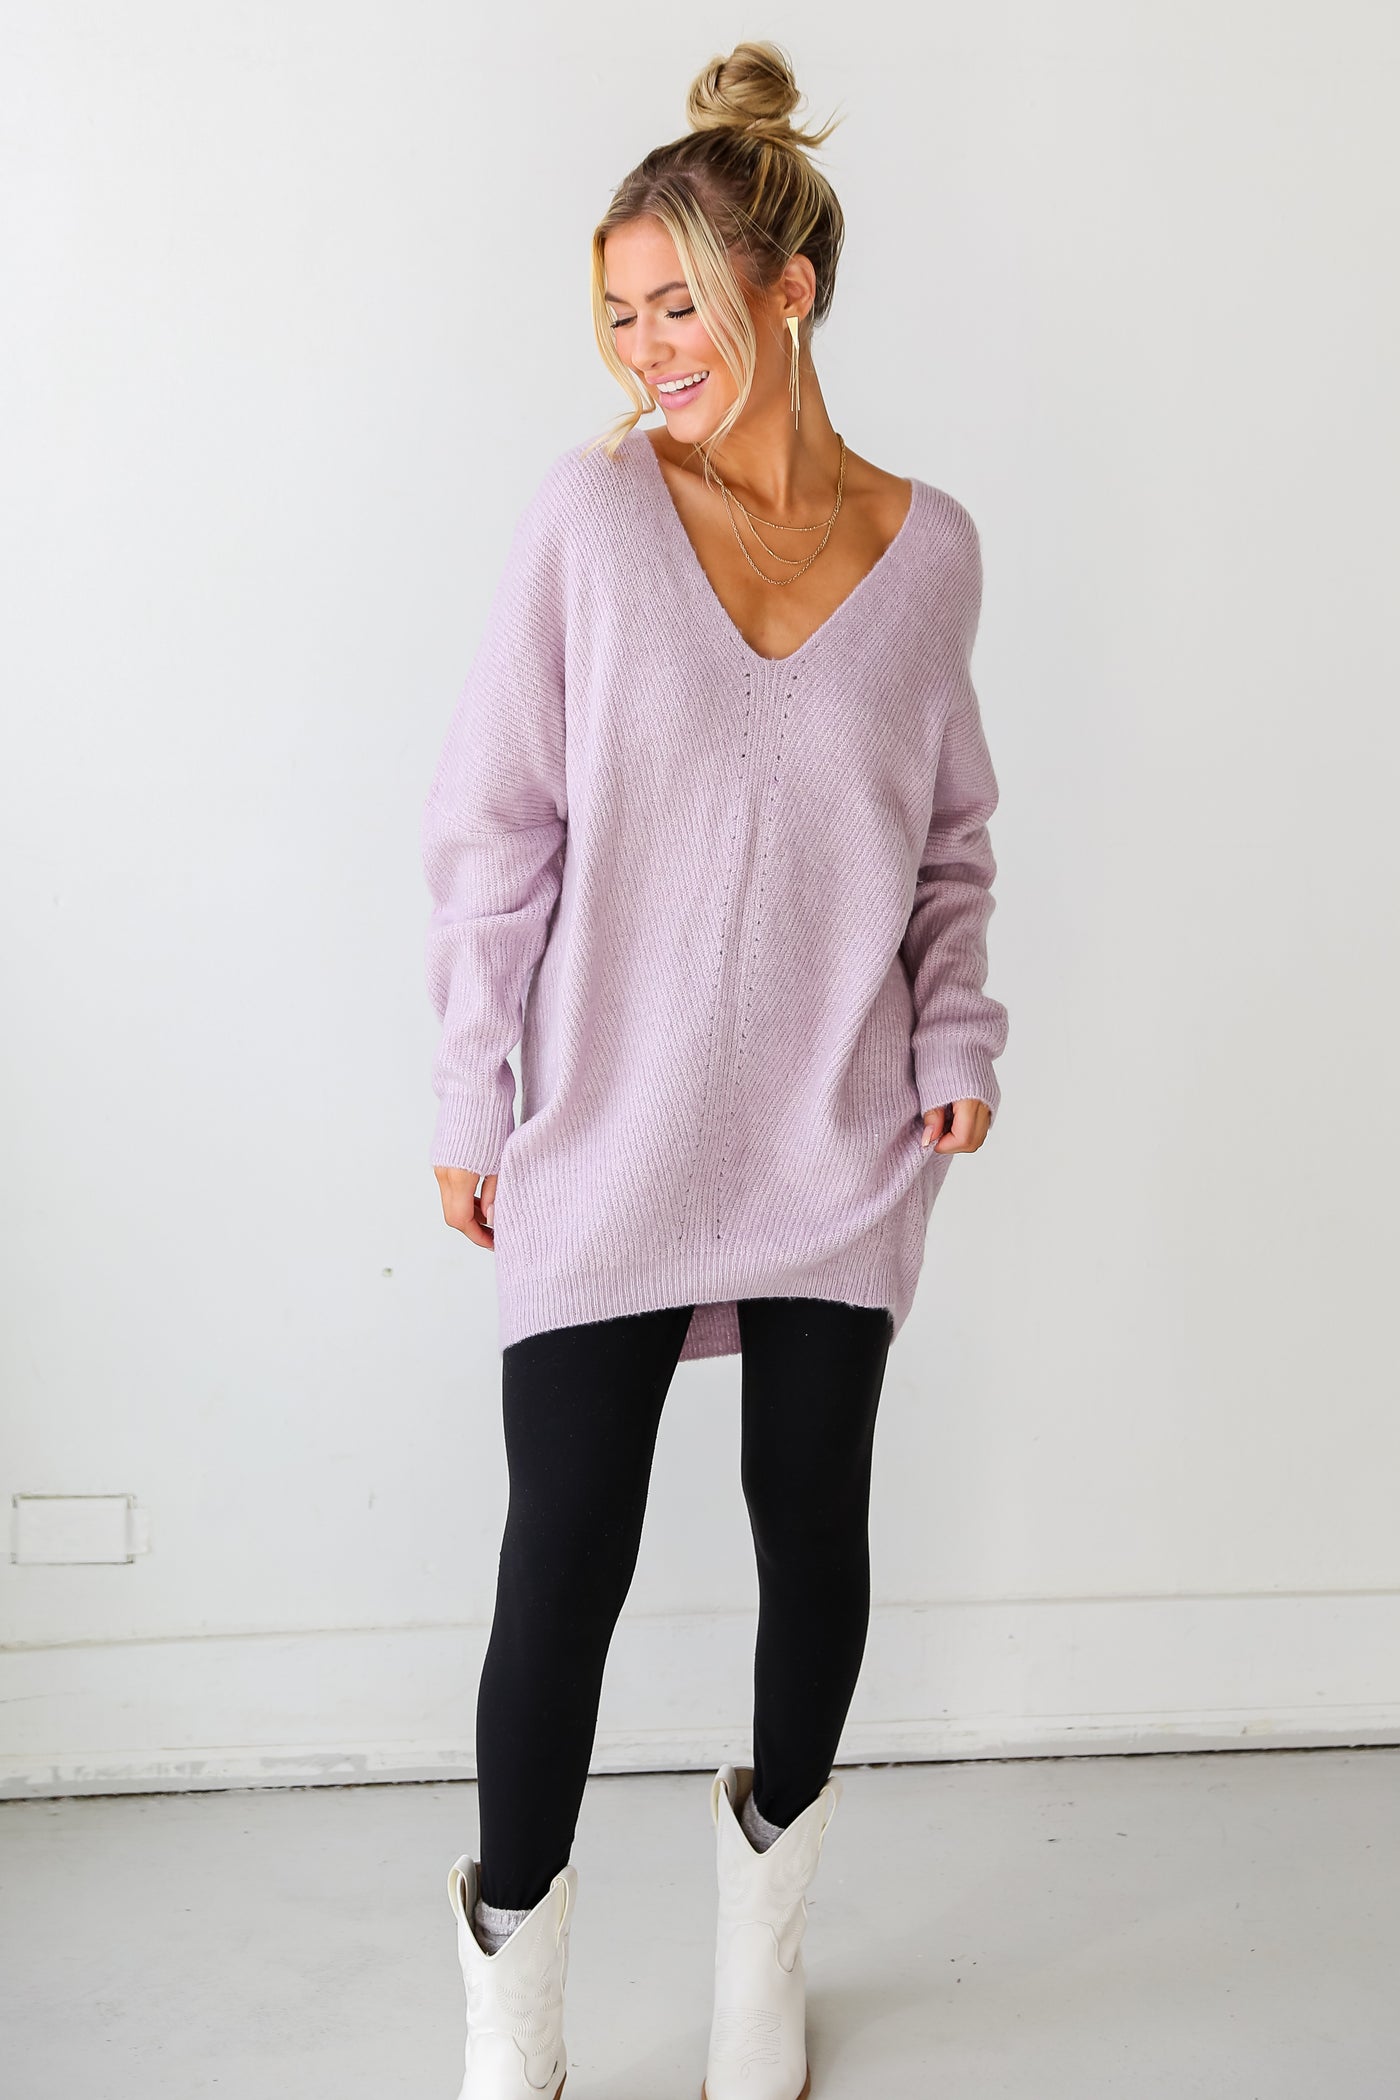 Lilac Oversized Sweater with leggings